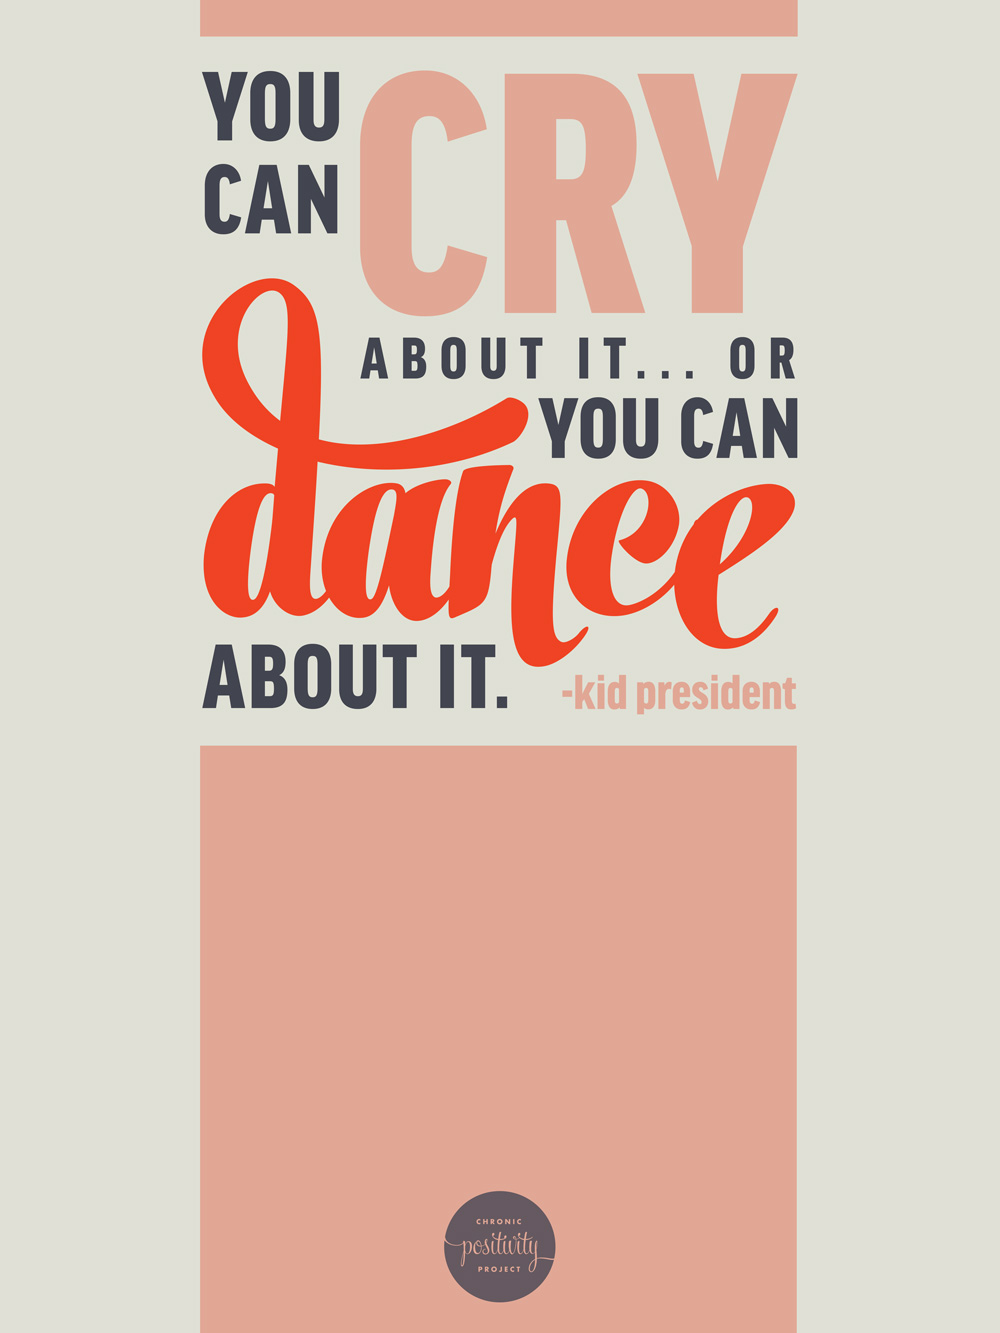 "You can cry about it or you can dance about it" - Kid President | A poster from the Chronic Positivity Project by Mary Fran Wiley